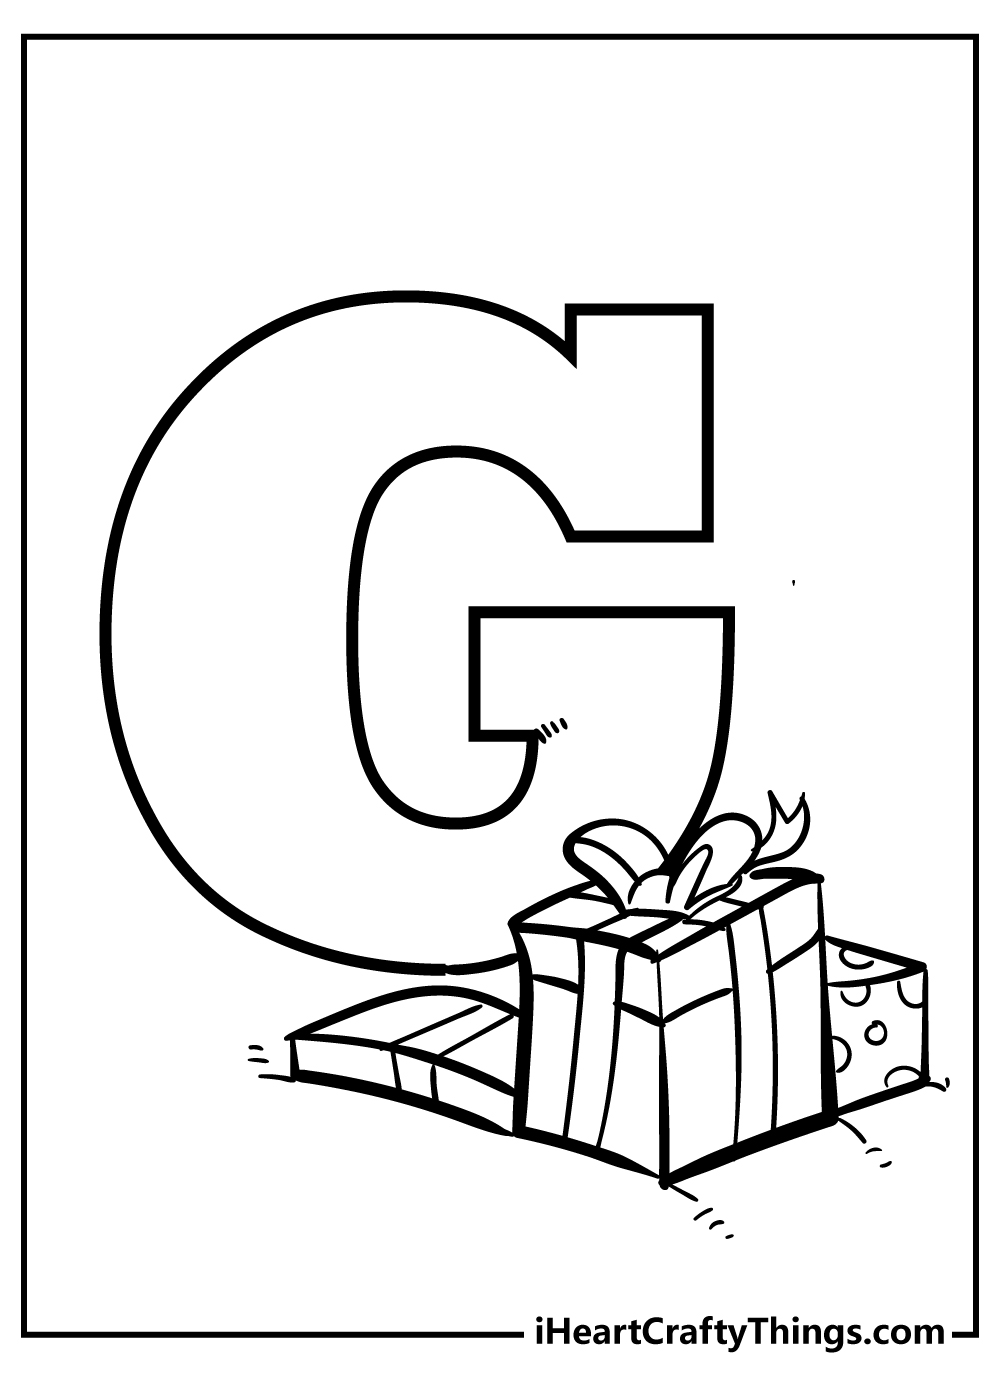 Letter G Coloring Book for kids free printable